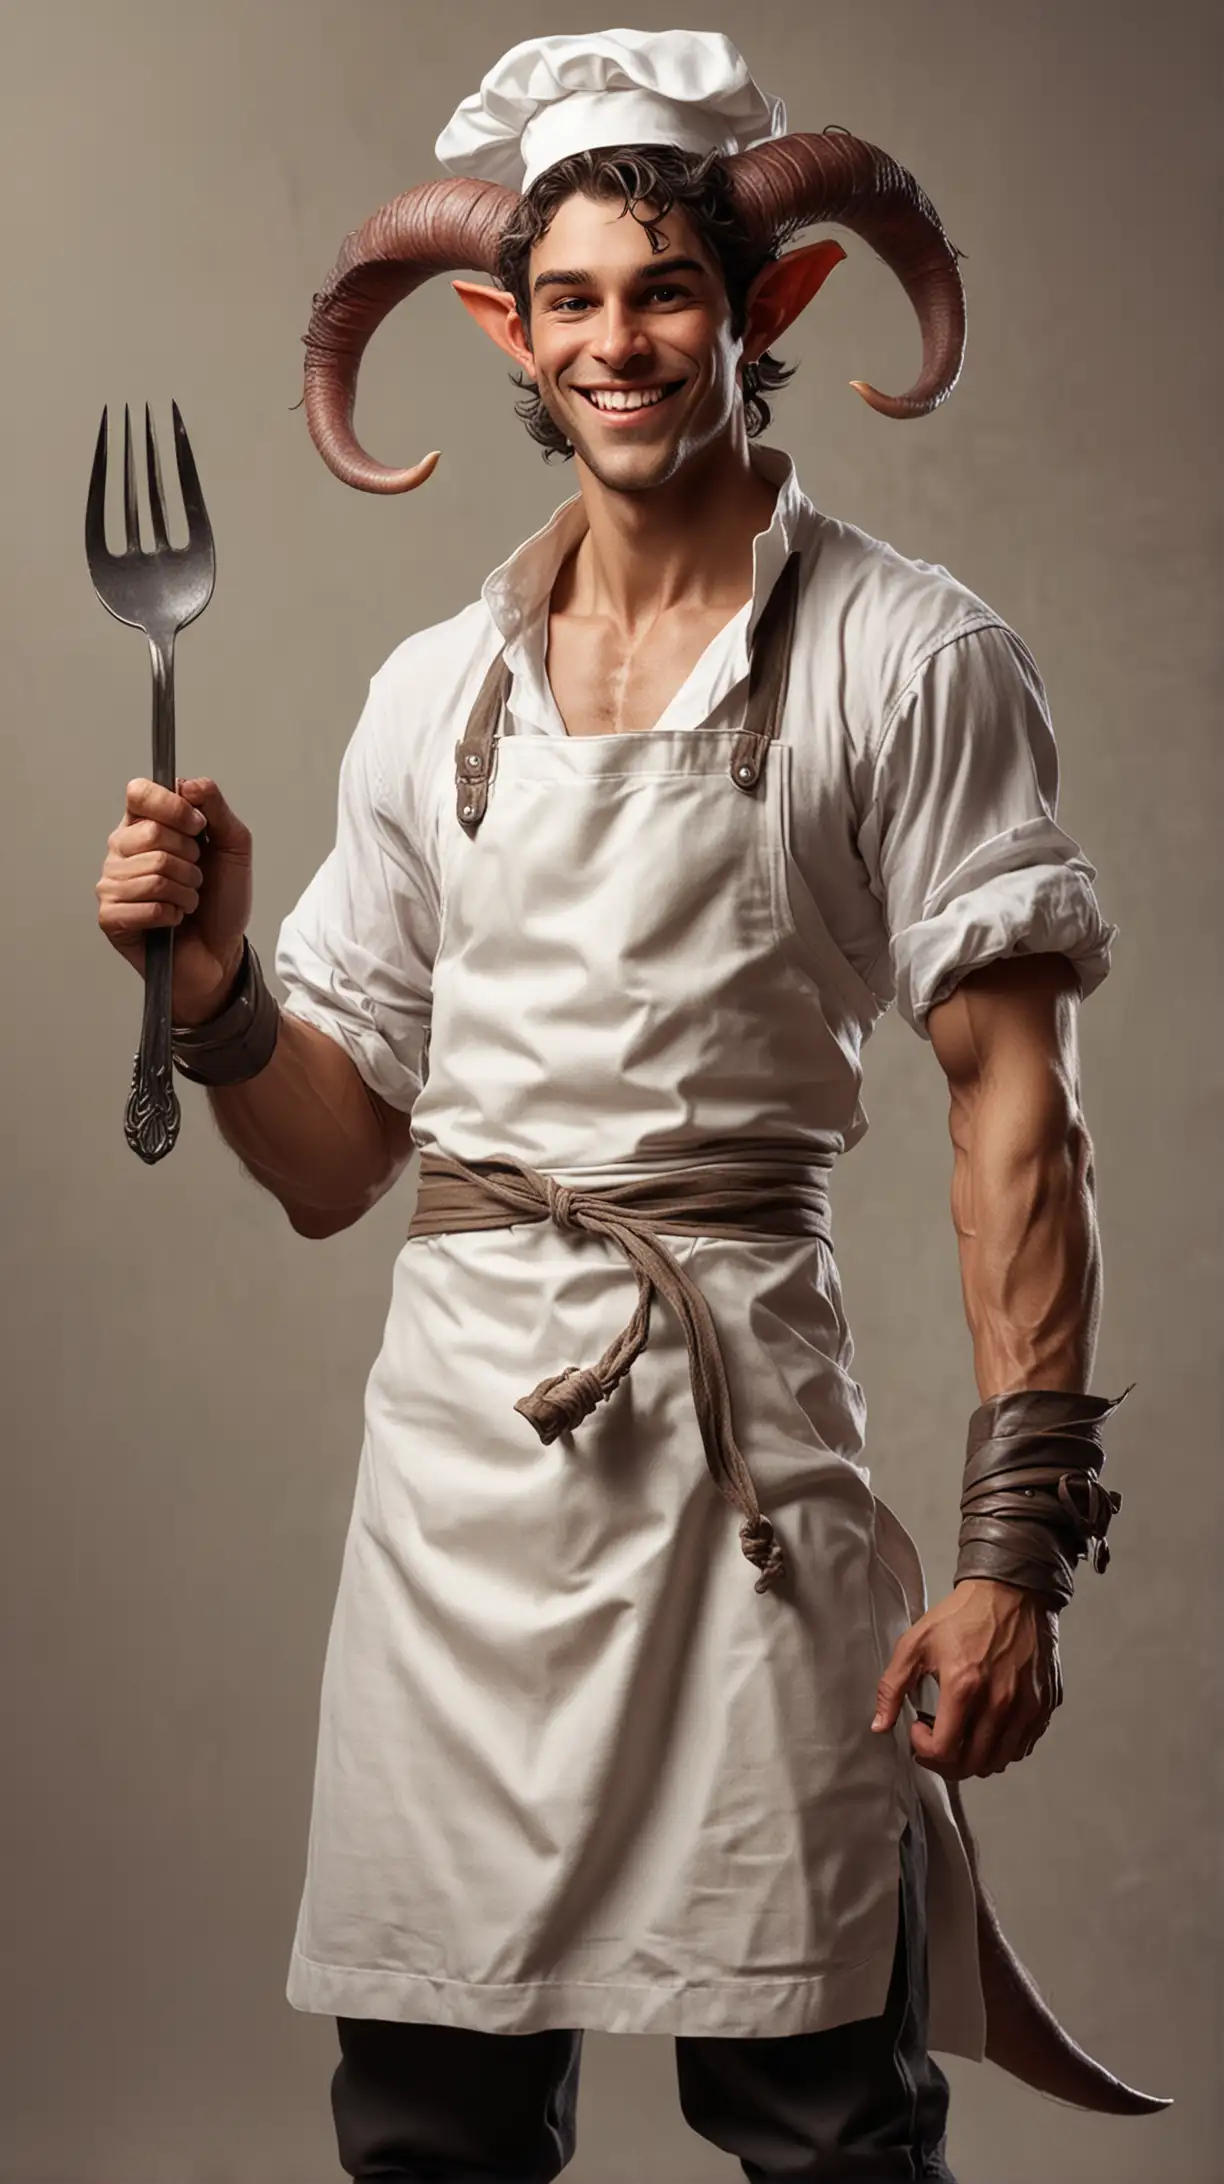 Charming Tiefling Chef with Muscles and Giant Fork